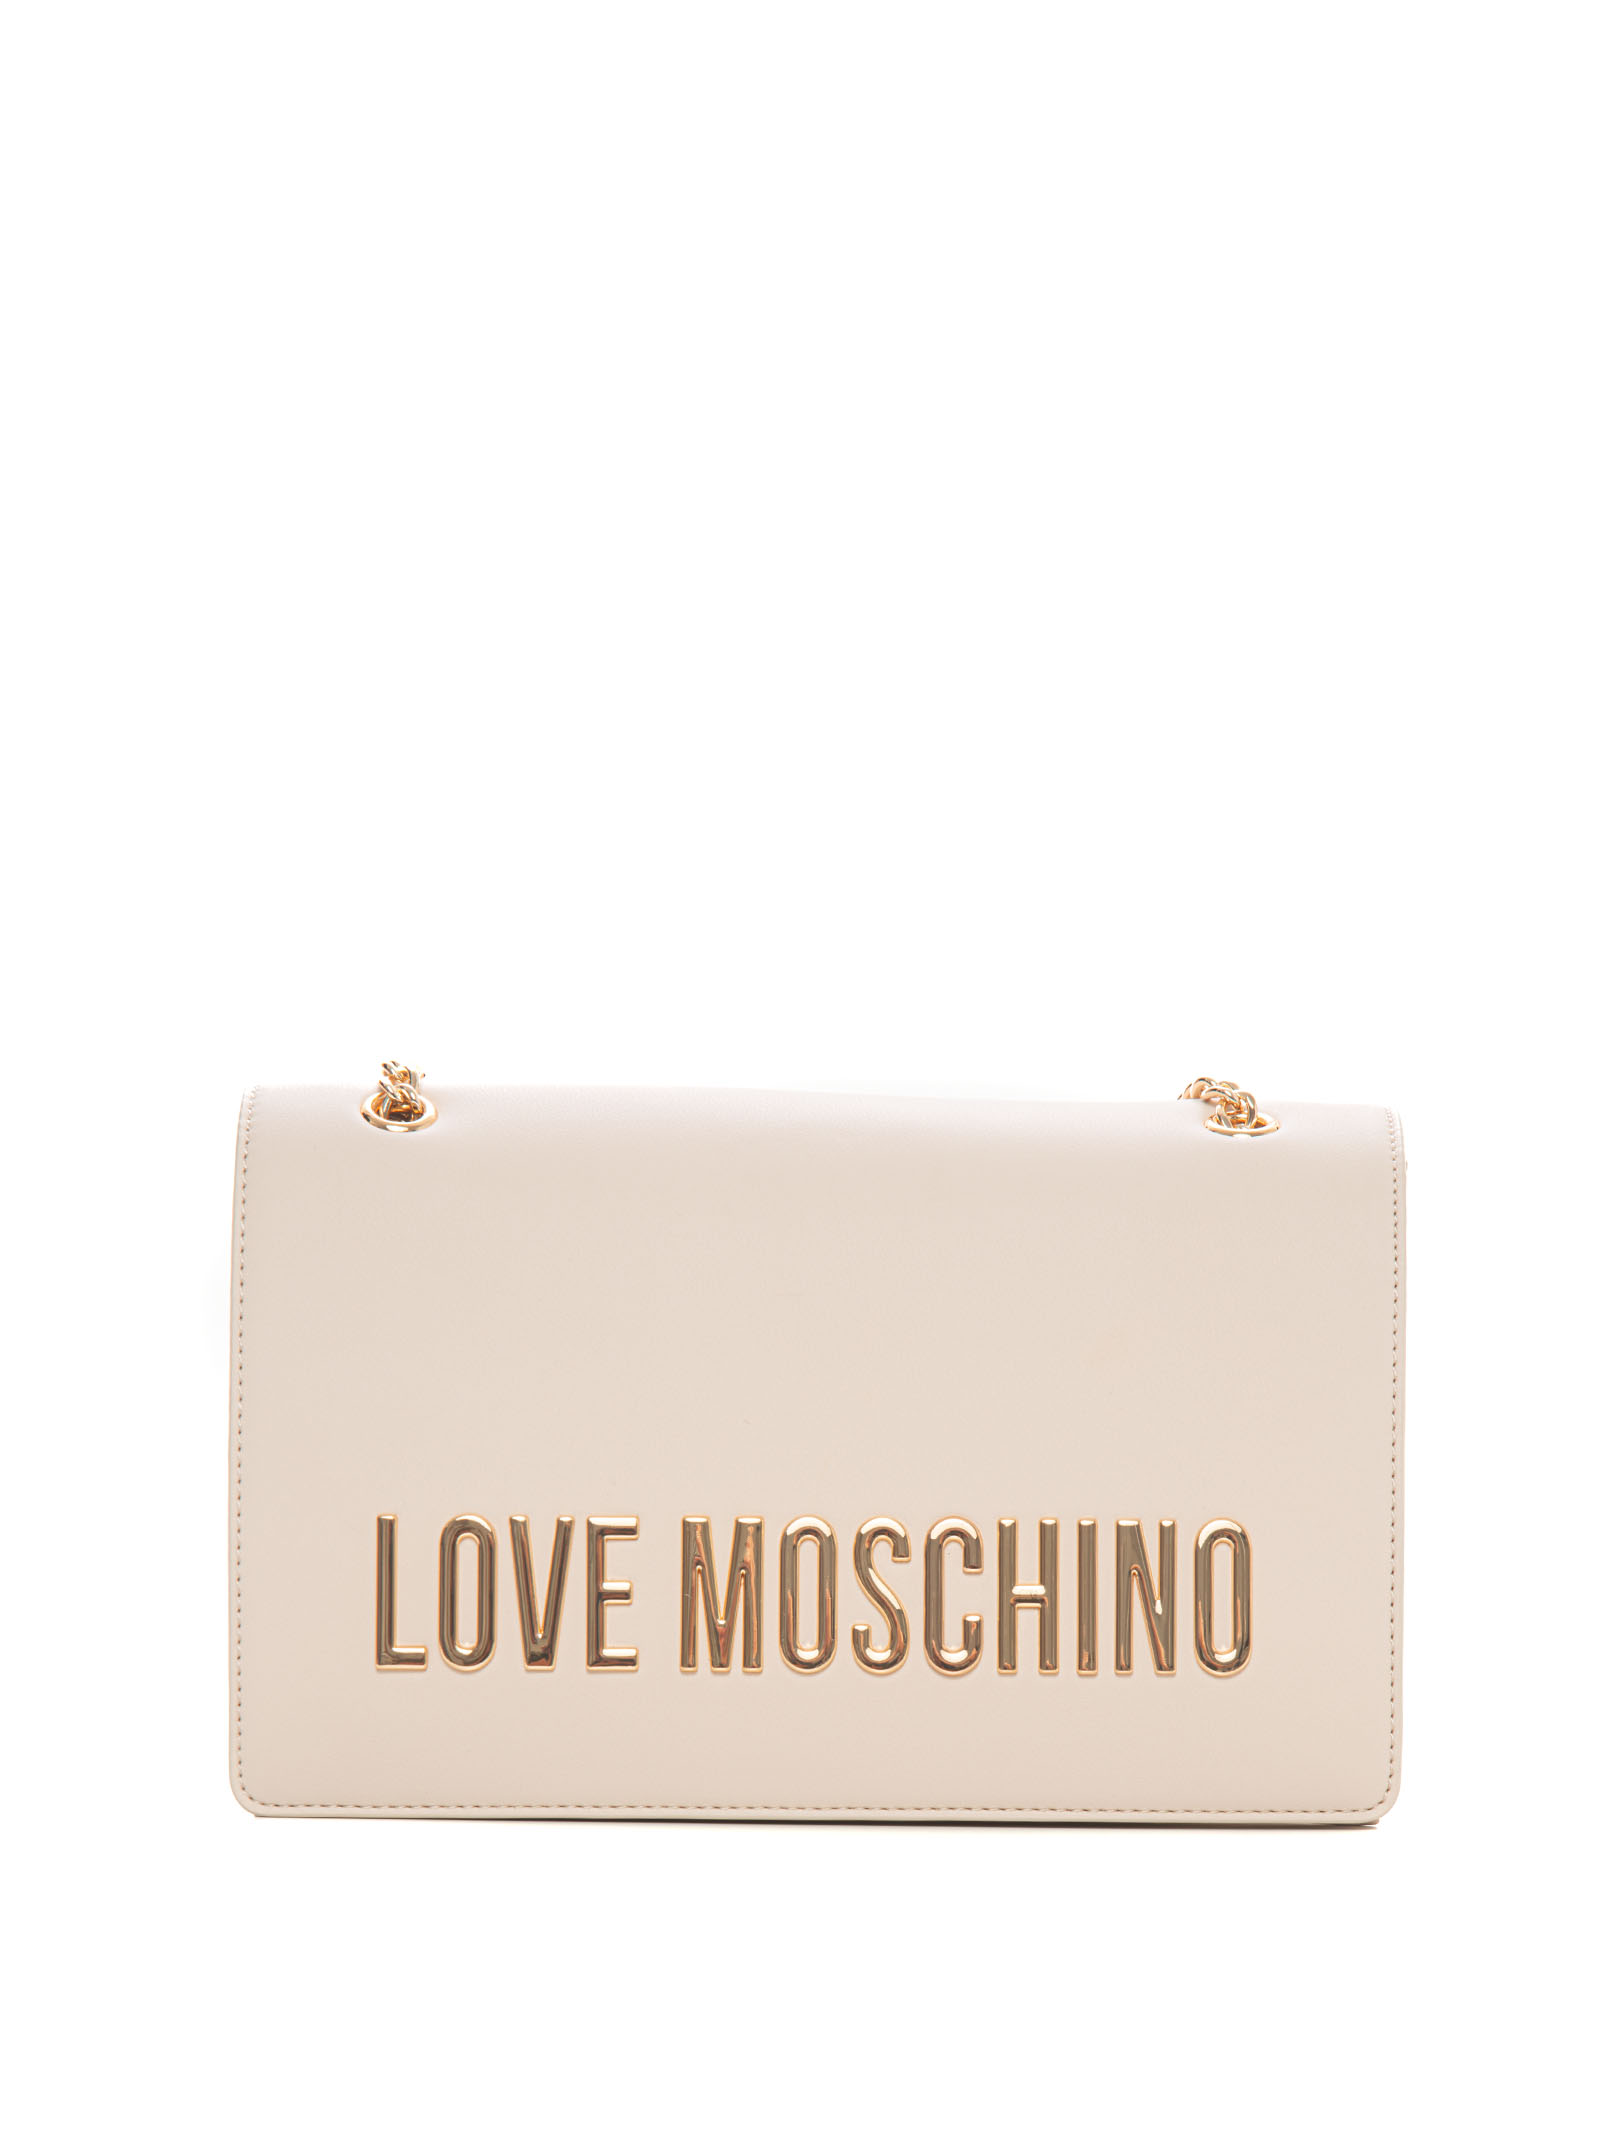 Love Moschino Shoulder Bag In Ivory